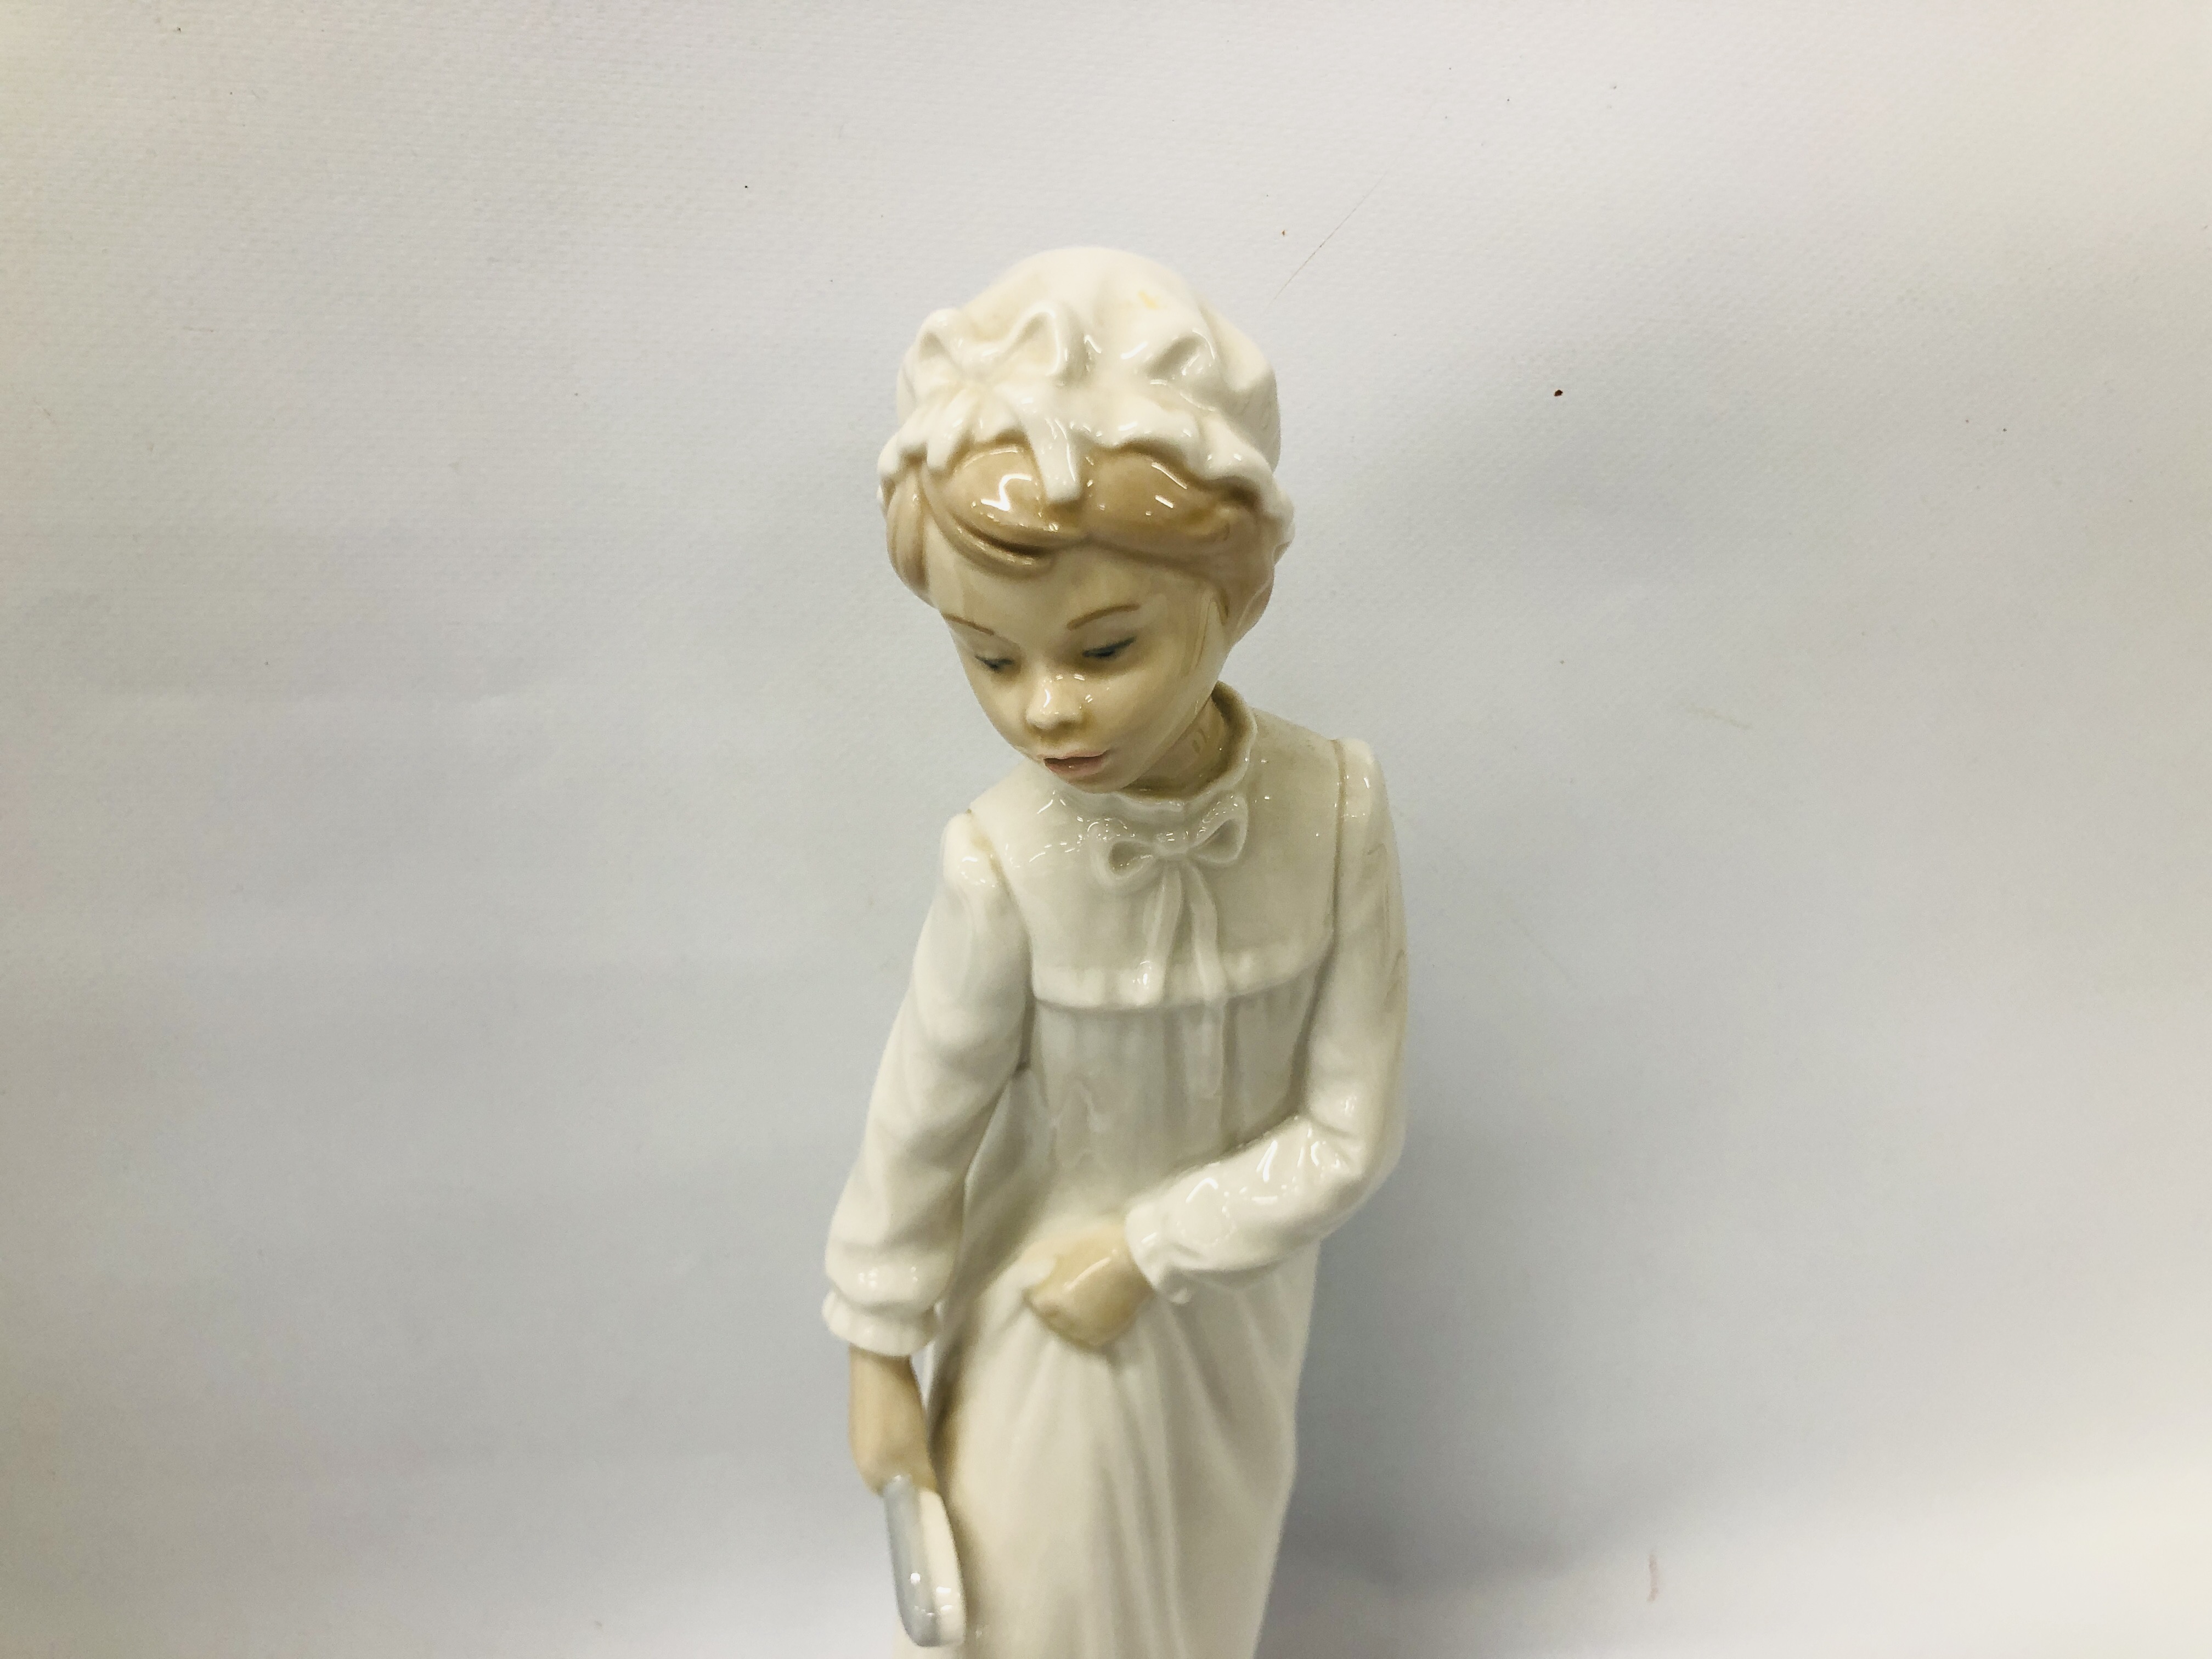 2 X LLADRO NAO FIGURES COMPRISING YOUNG GIRL IN NIGHTWEAR CLEANSING HER FEET + ORIGINAL STYLE LADY - Image 2 of 12